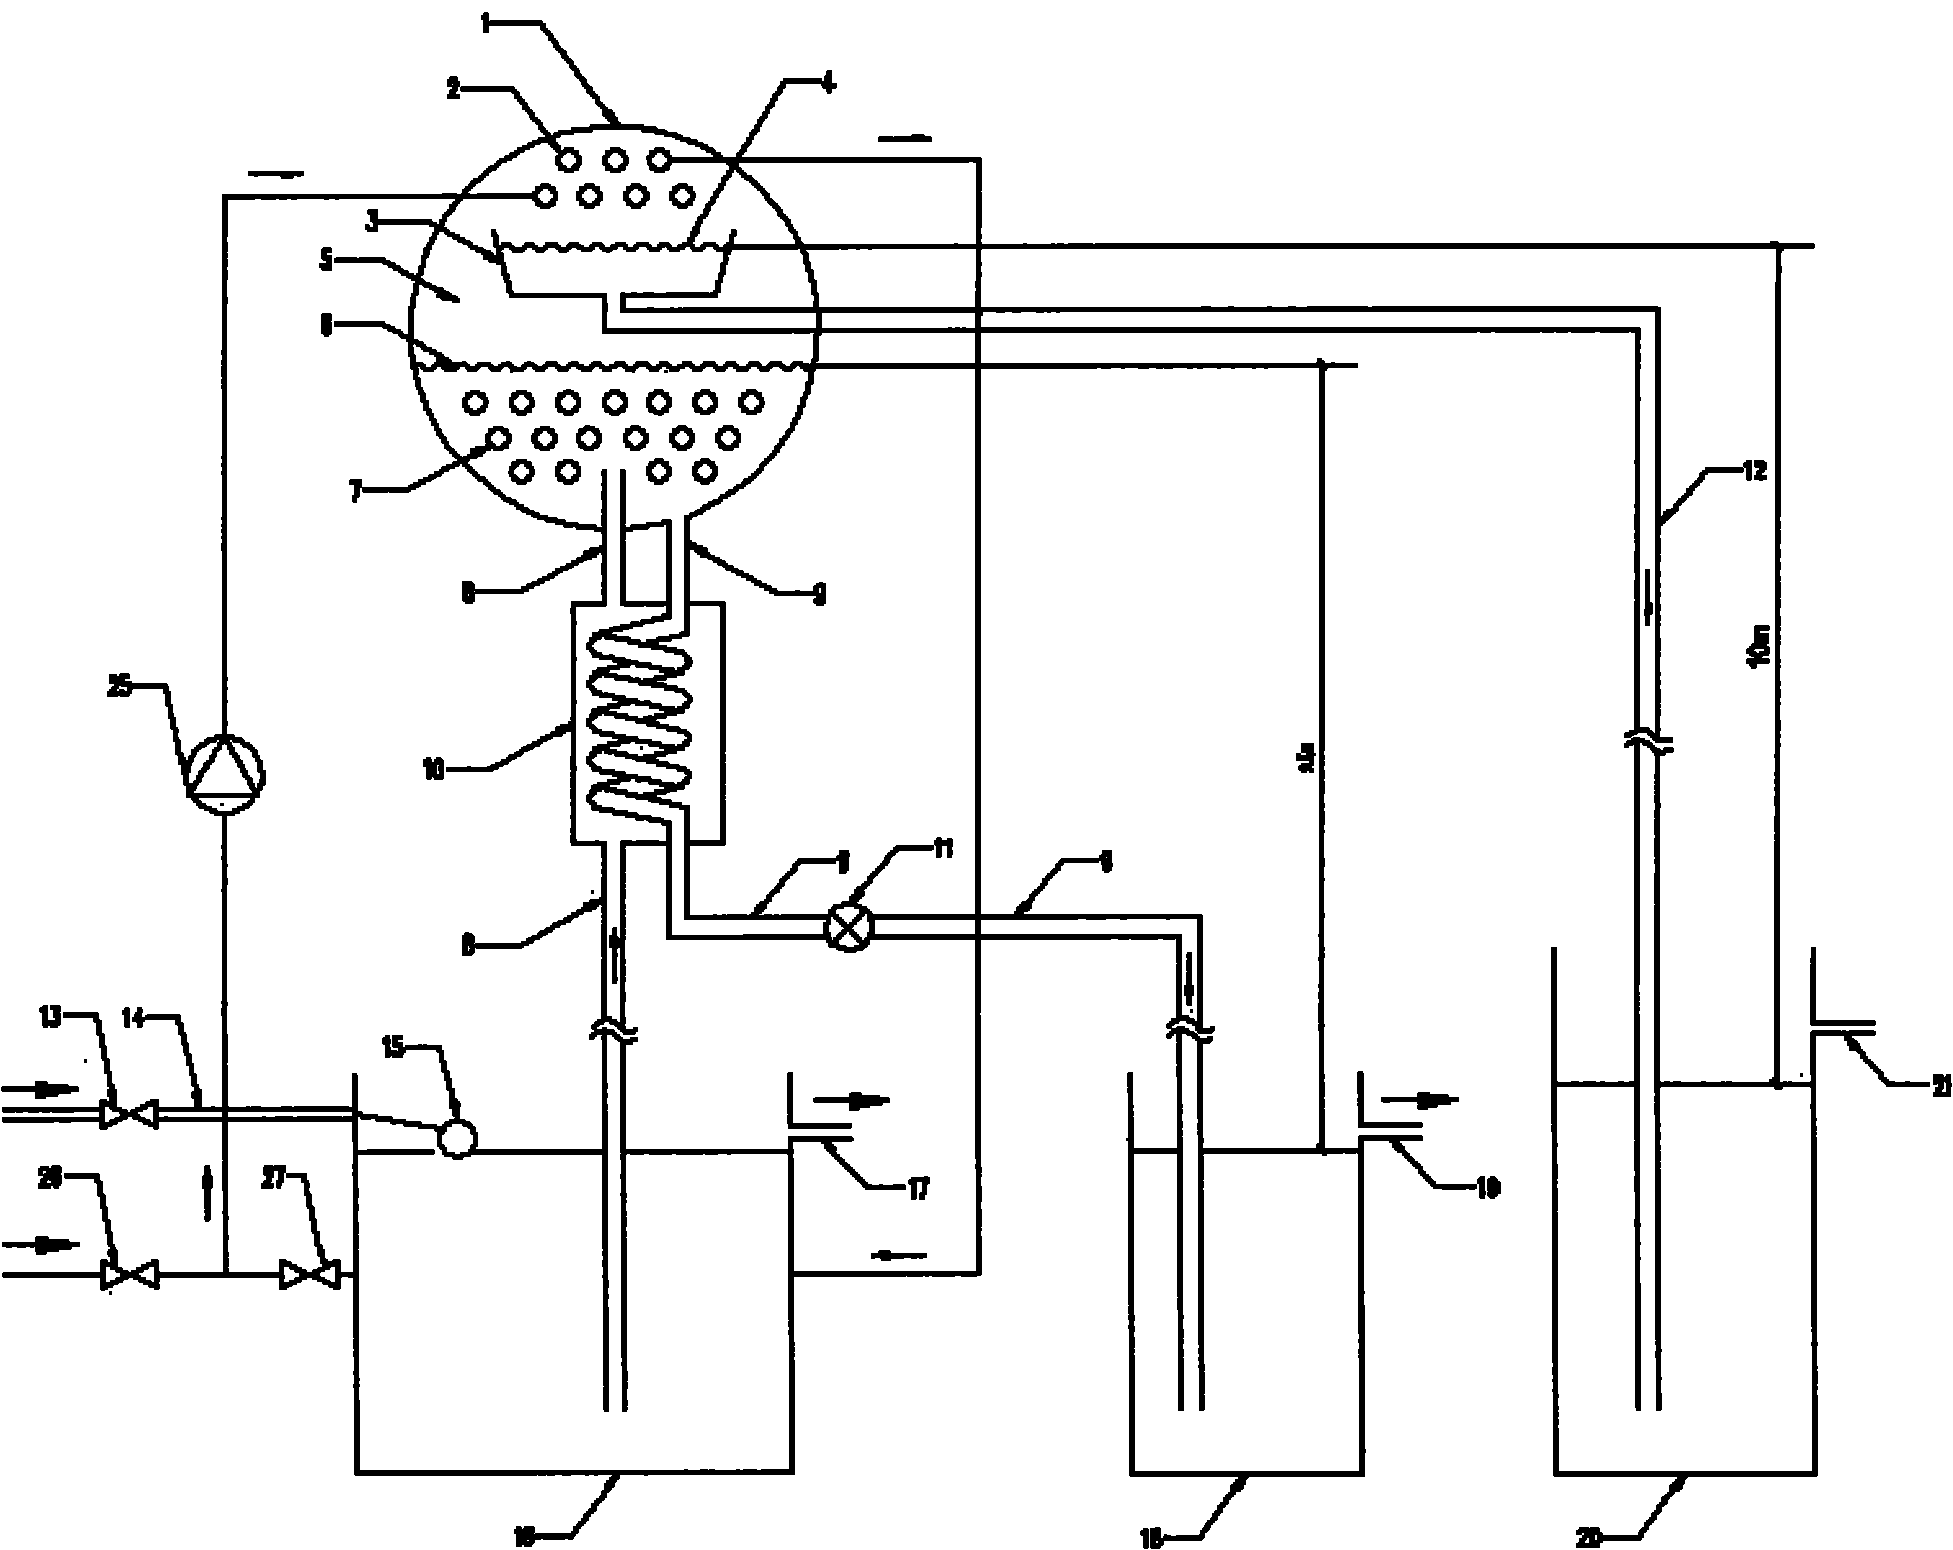 Low-temperature heat energy driven device for distilling and separating water evaporated under negative pressure